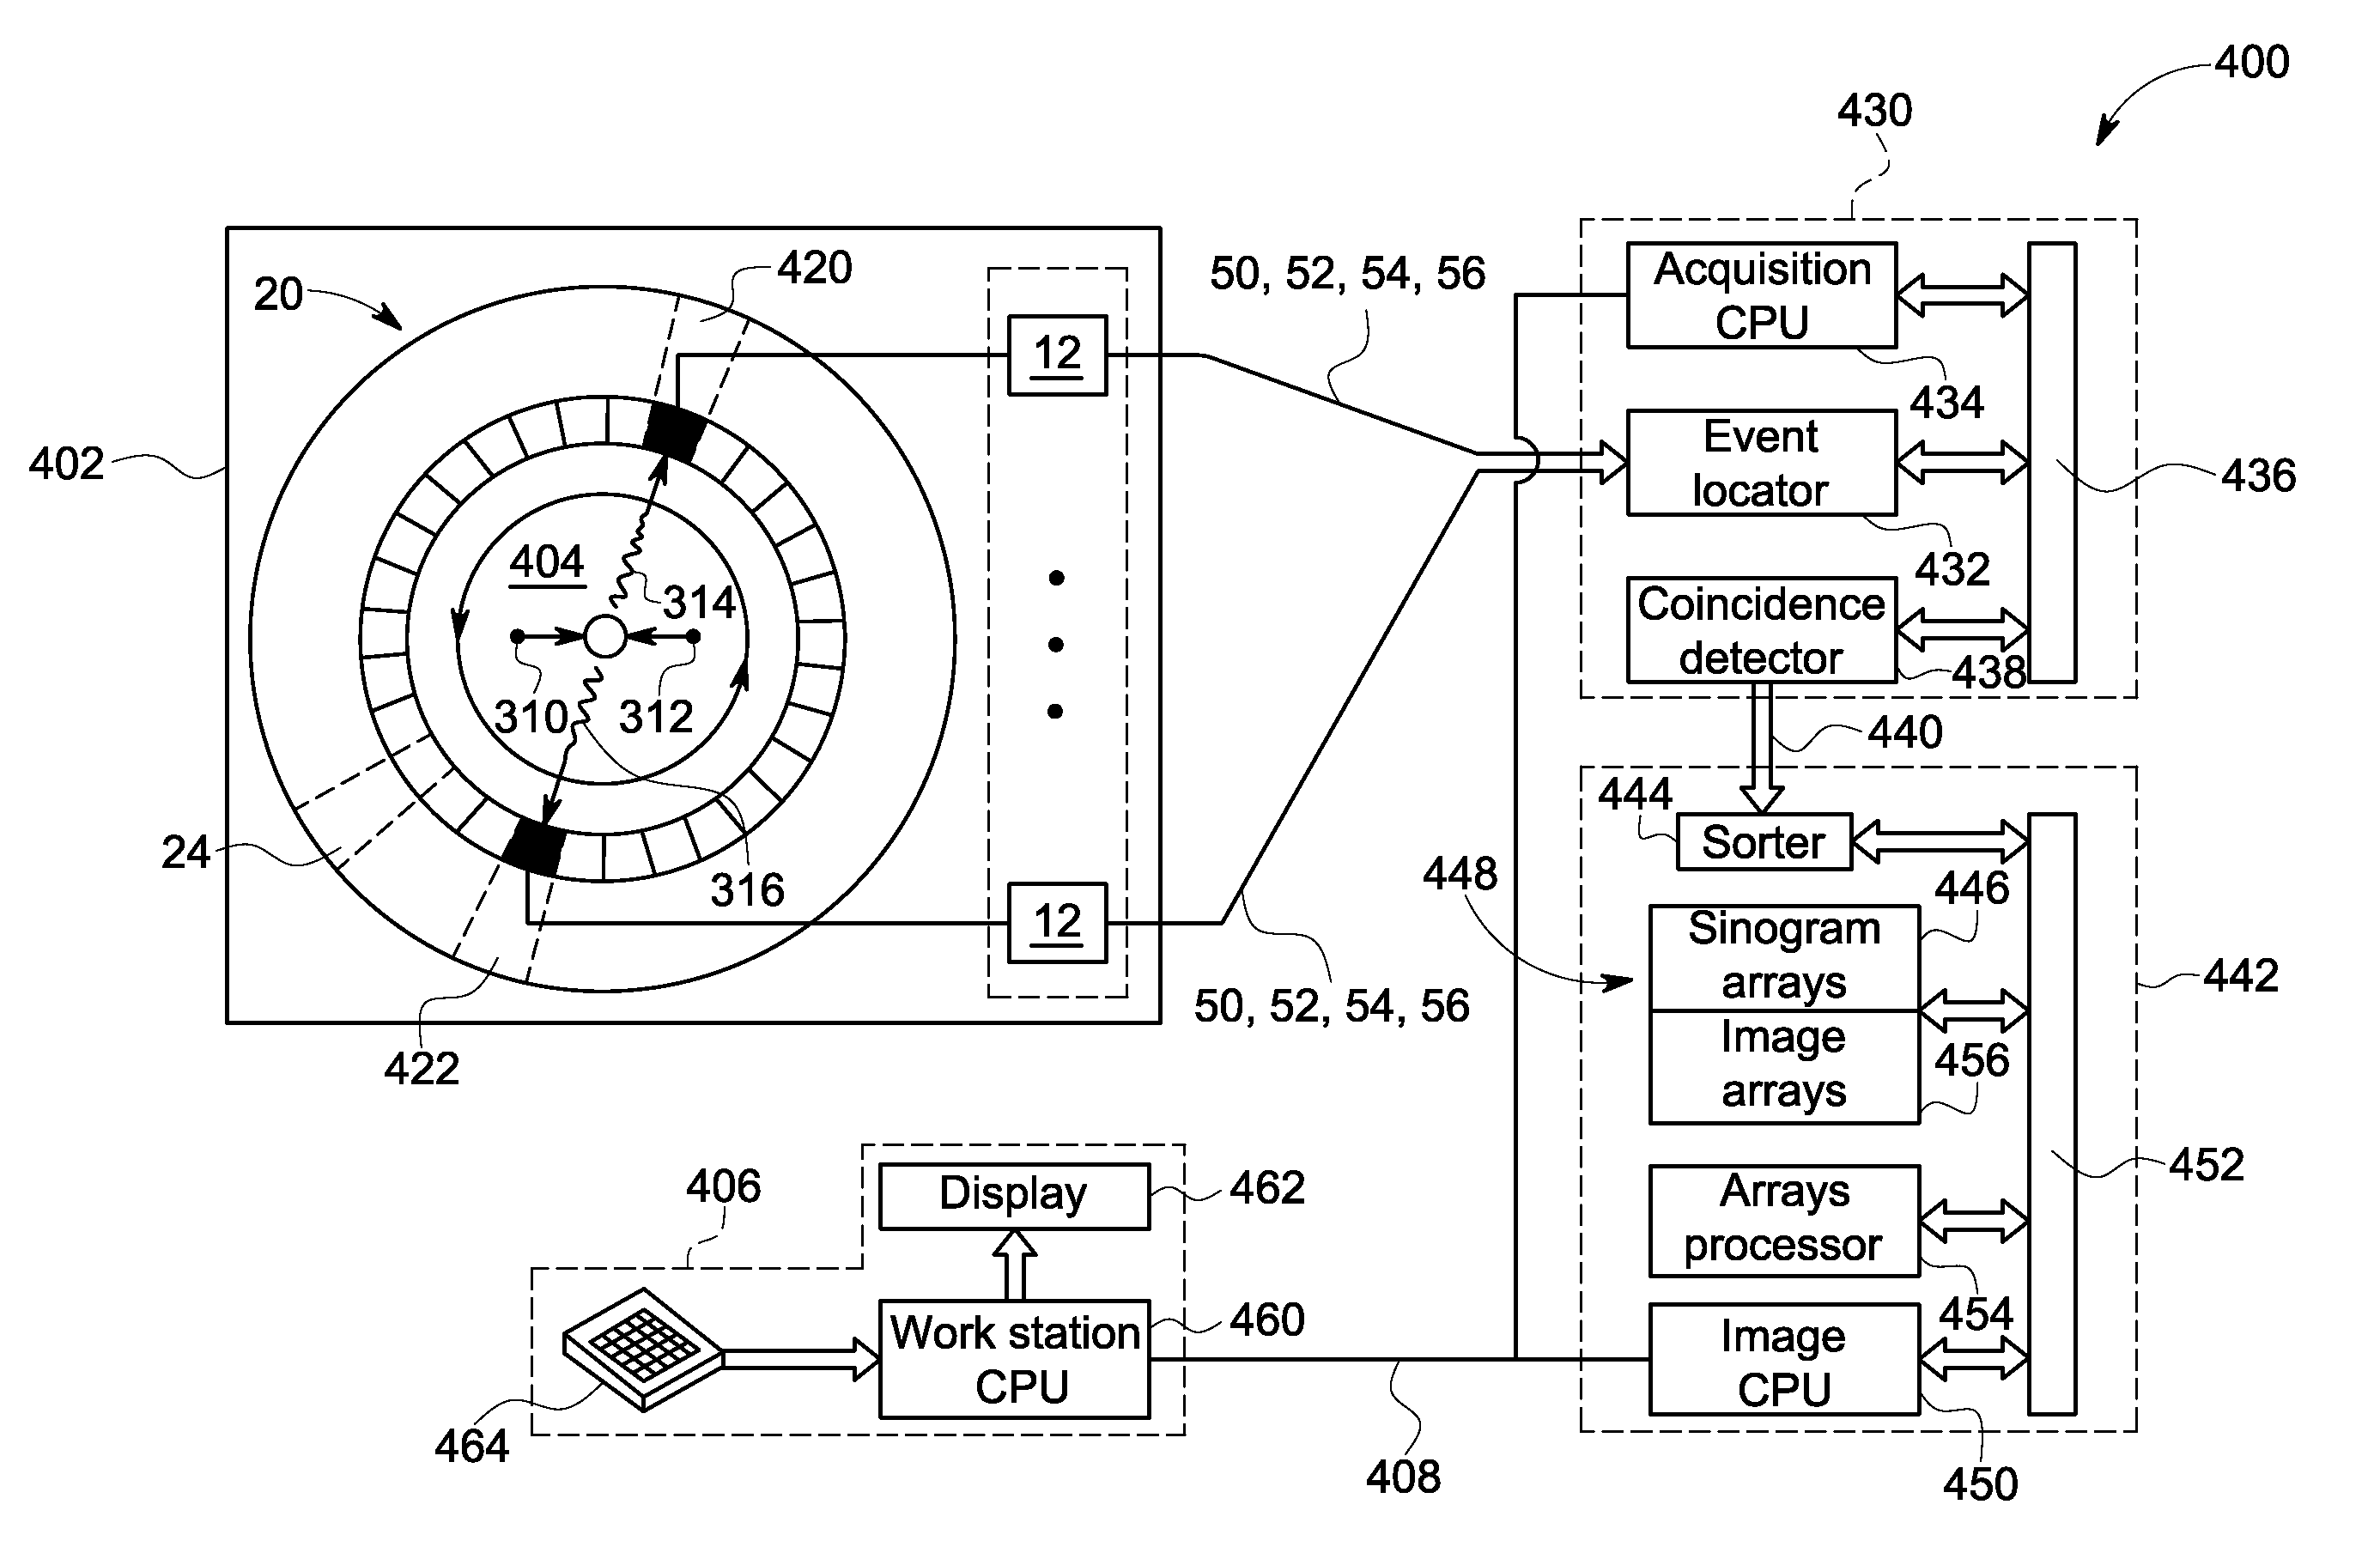 System and method for correcting timing errors in a medical imaging system